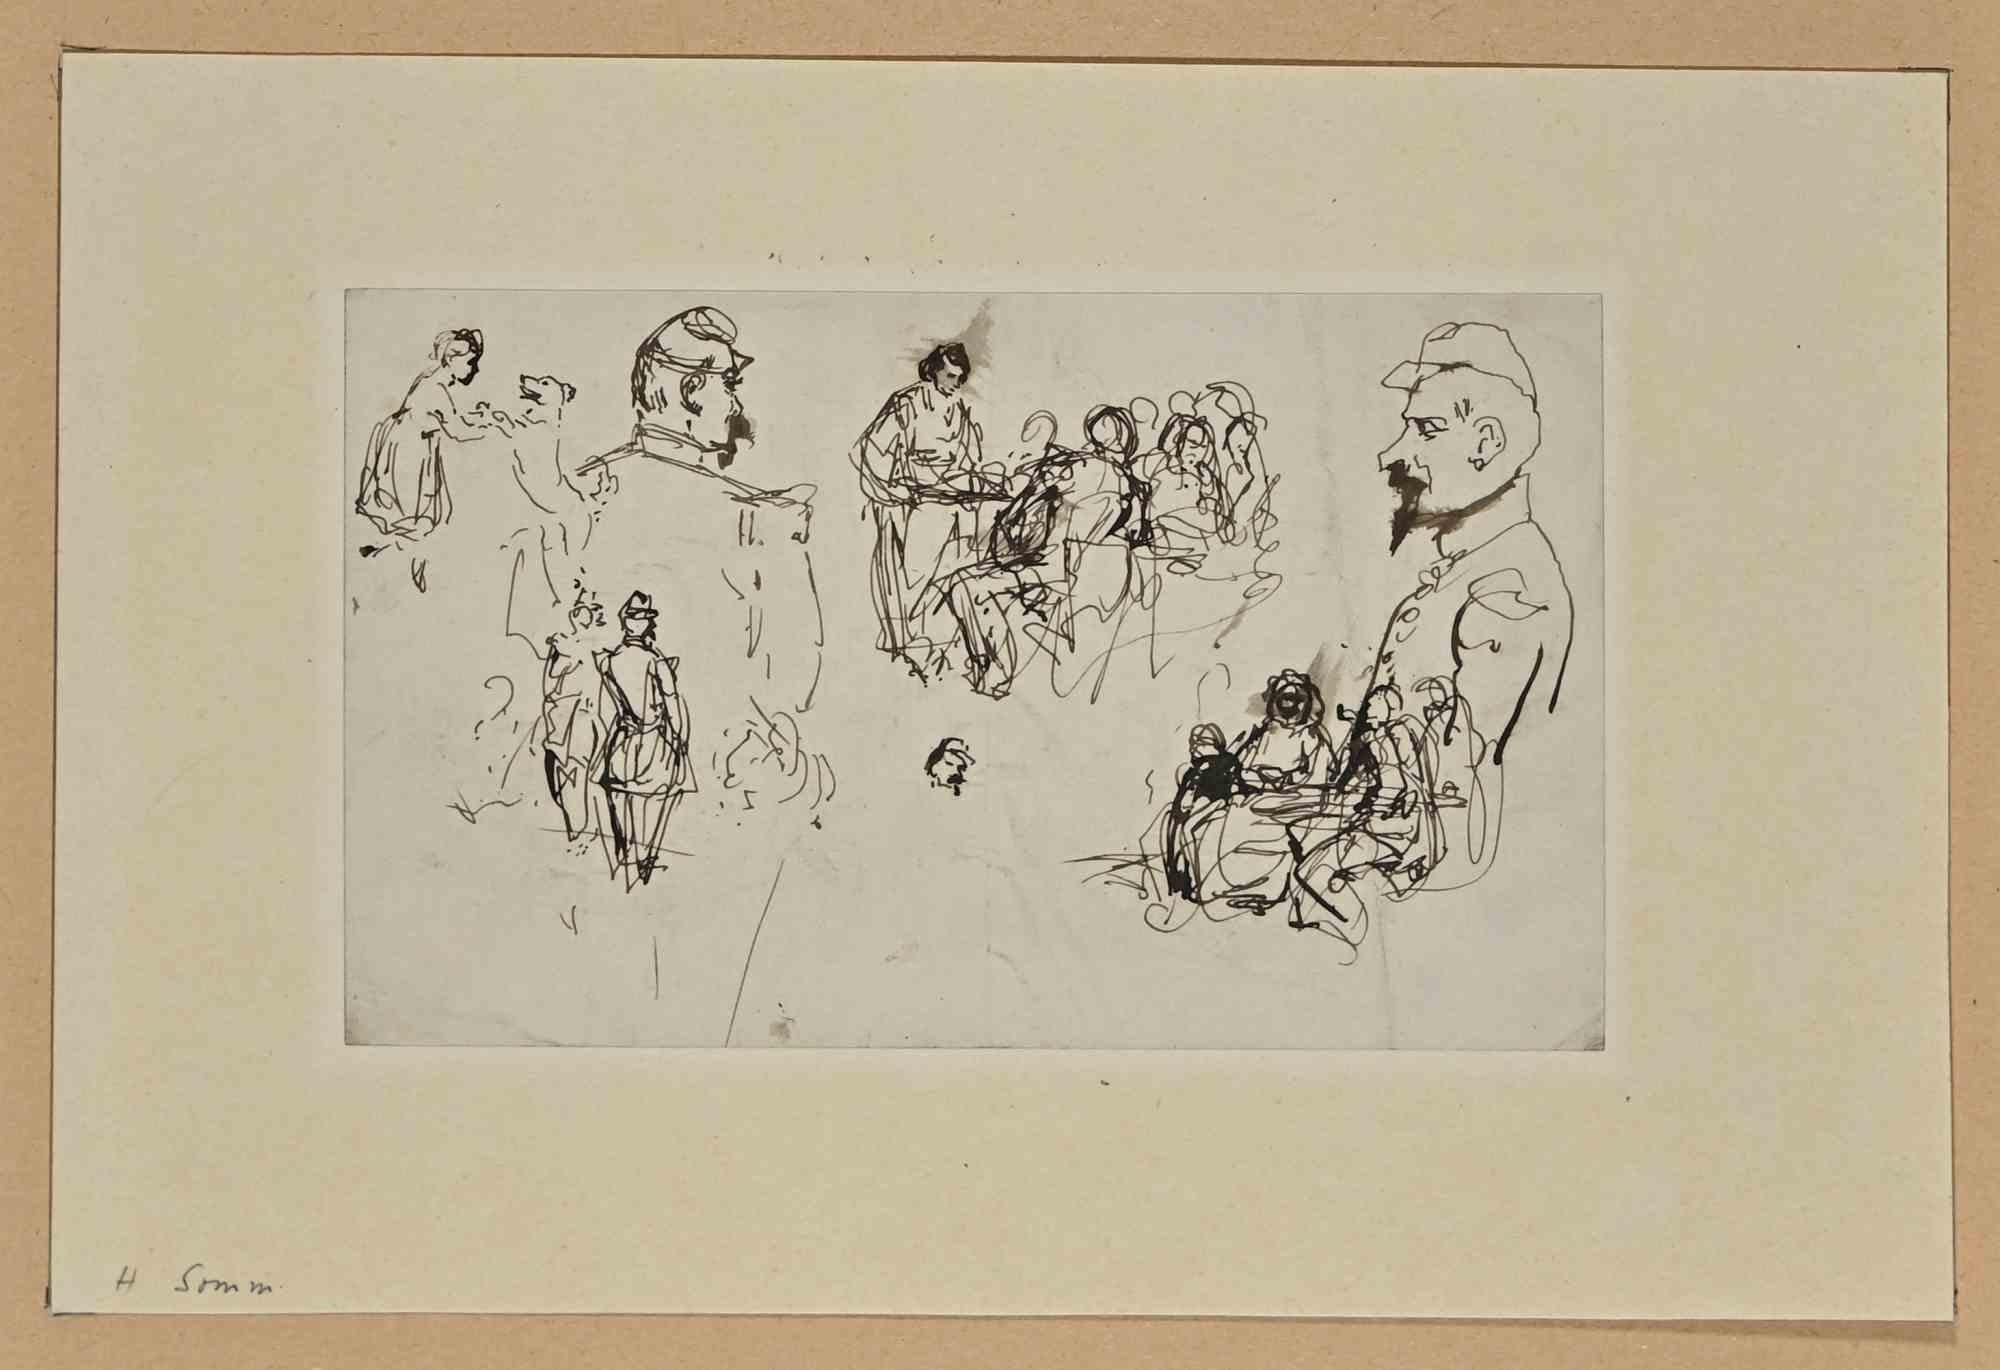 Figures - Drawing on Paper by H. Somm - Late 19th Century - Art by Henry Somm